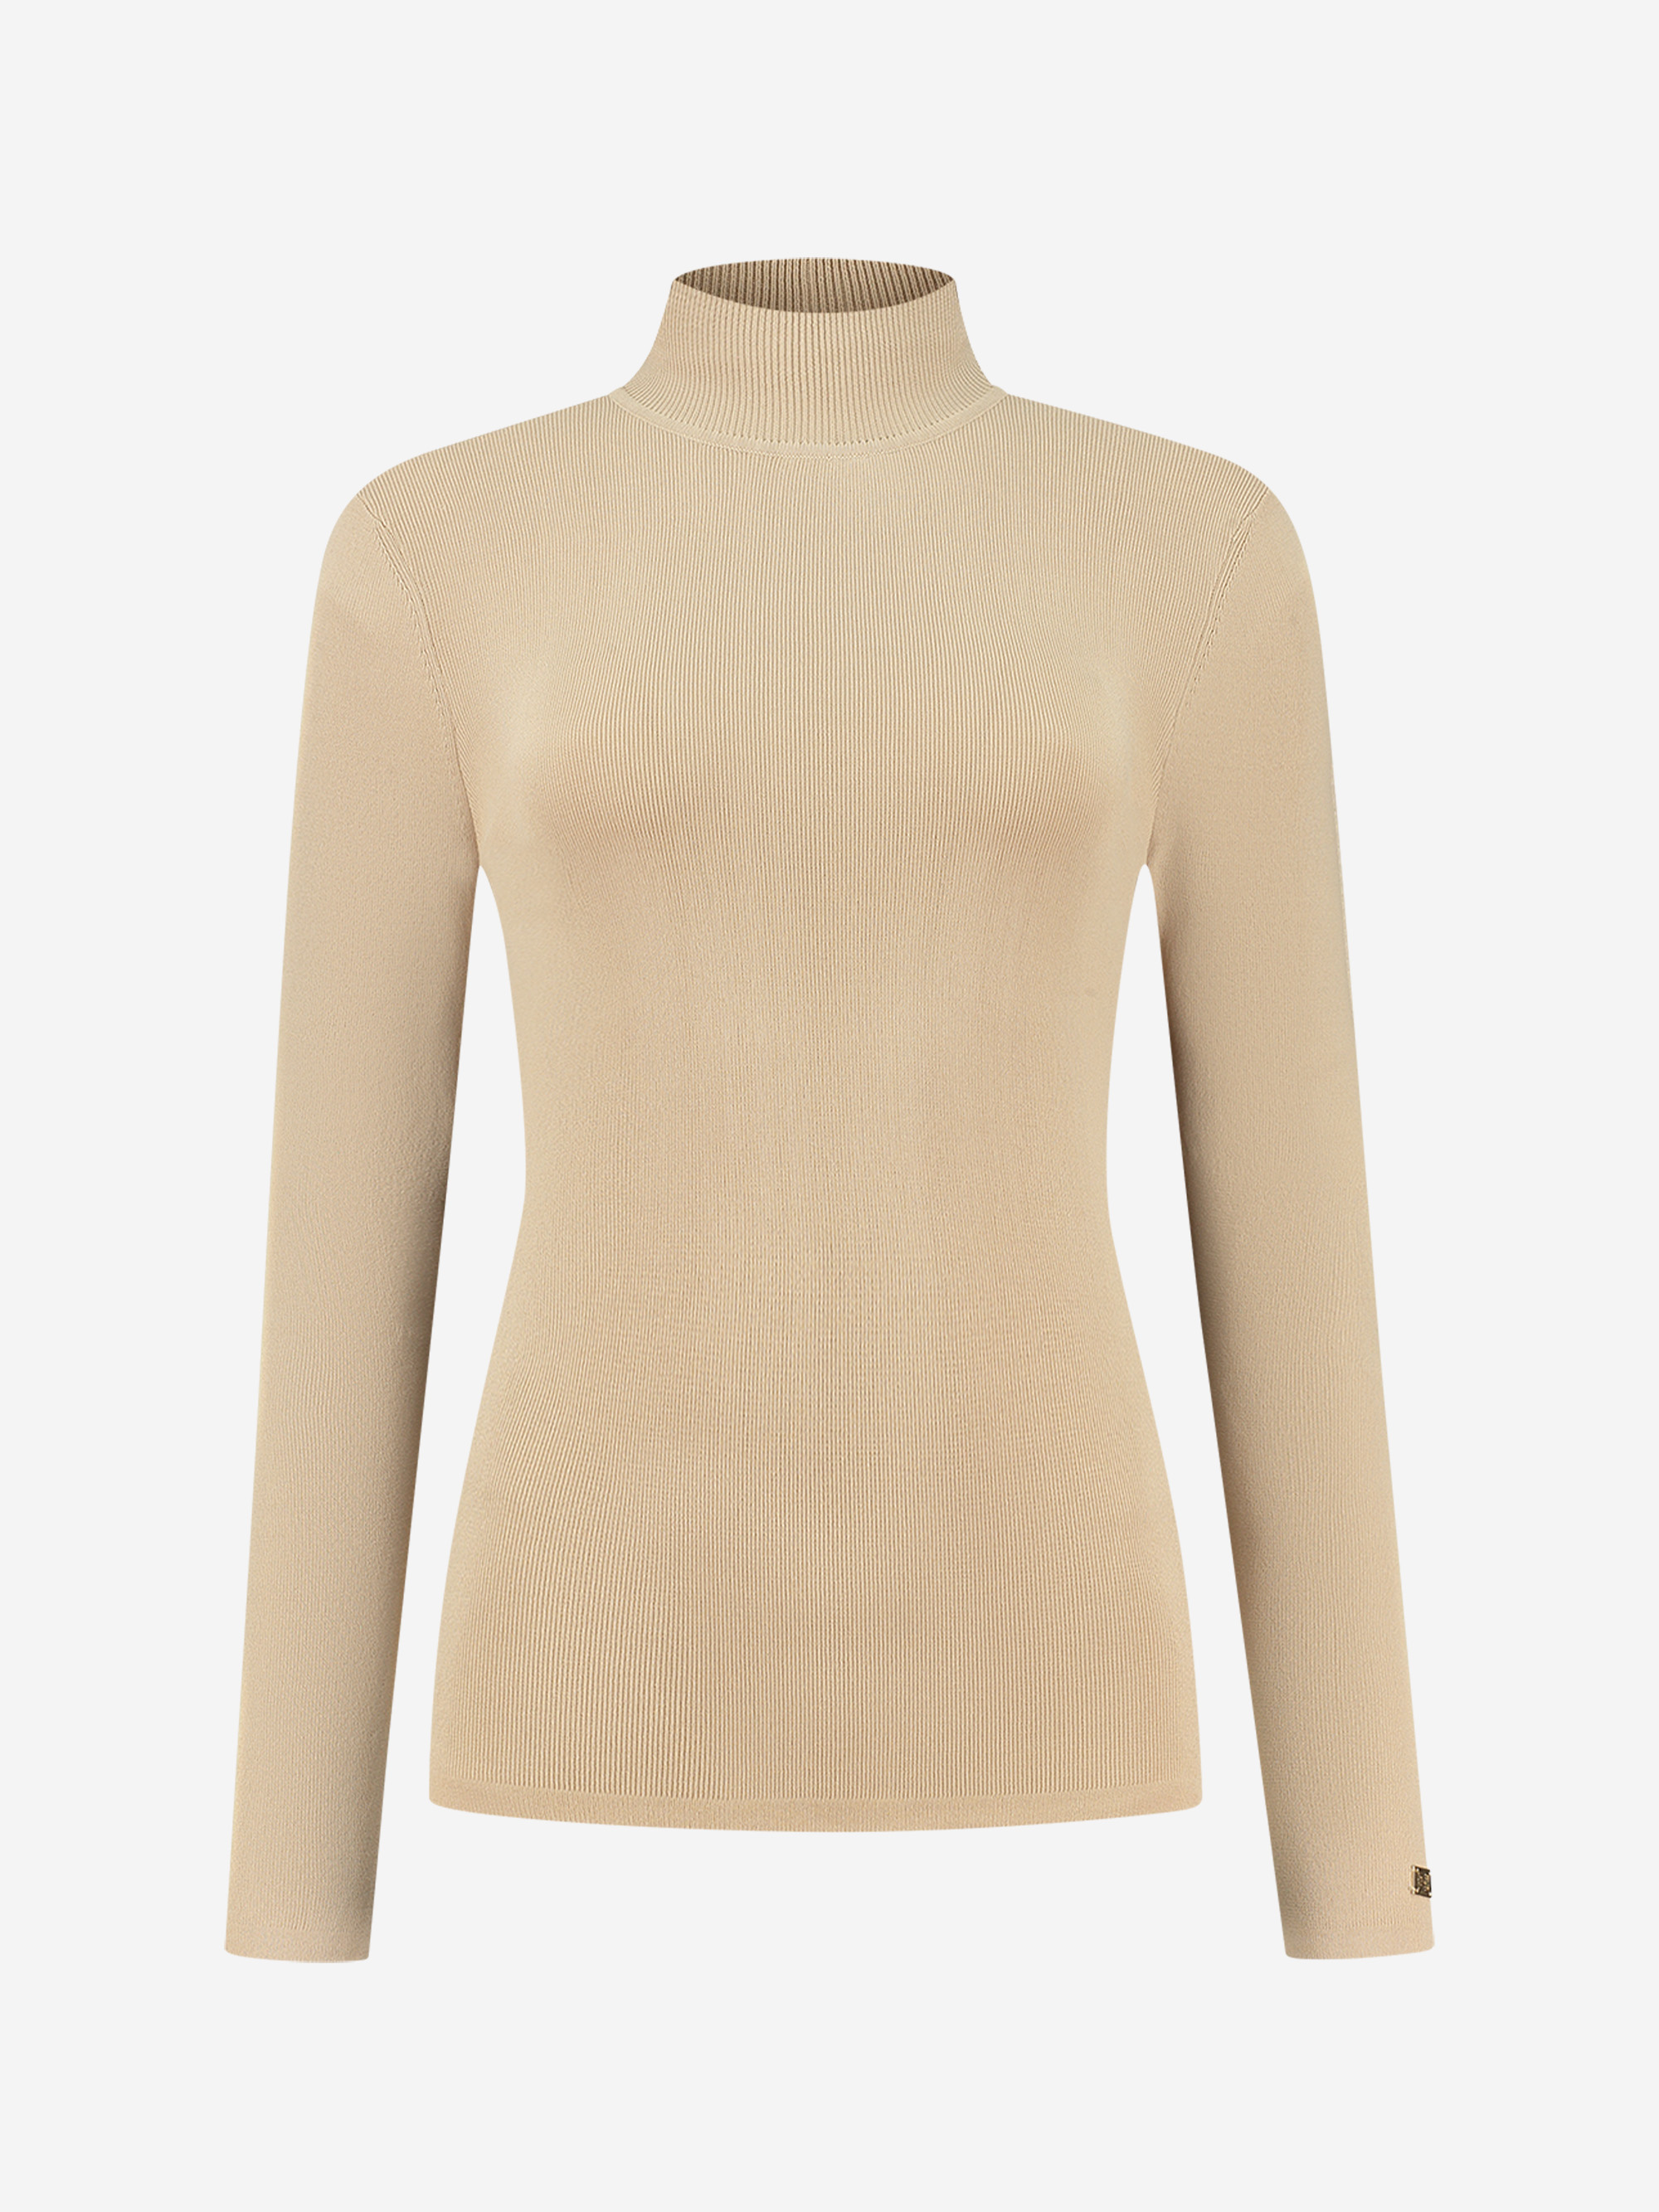 Fitted top with turtle neck 